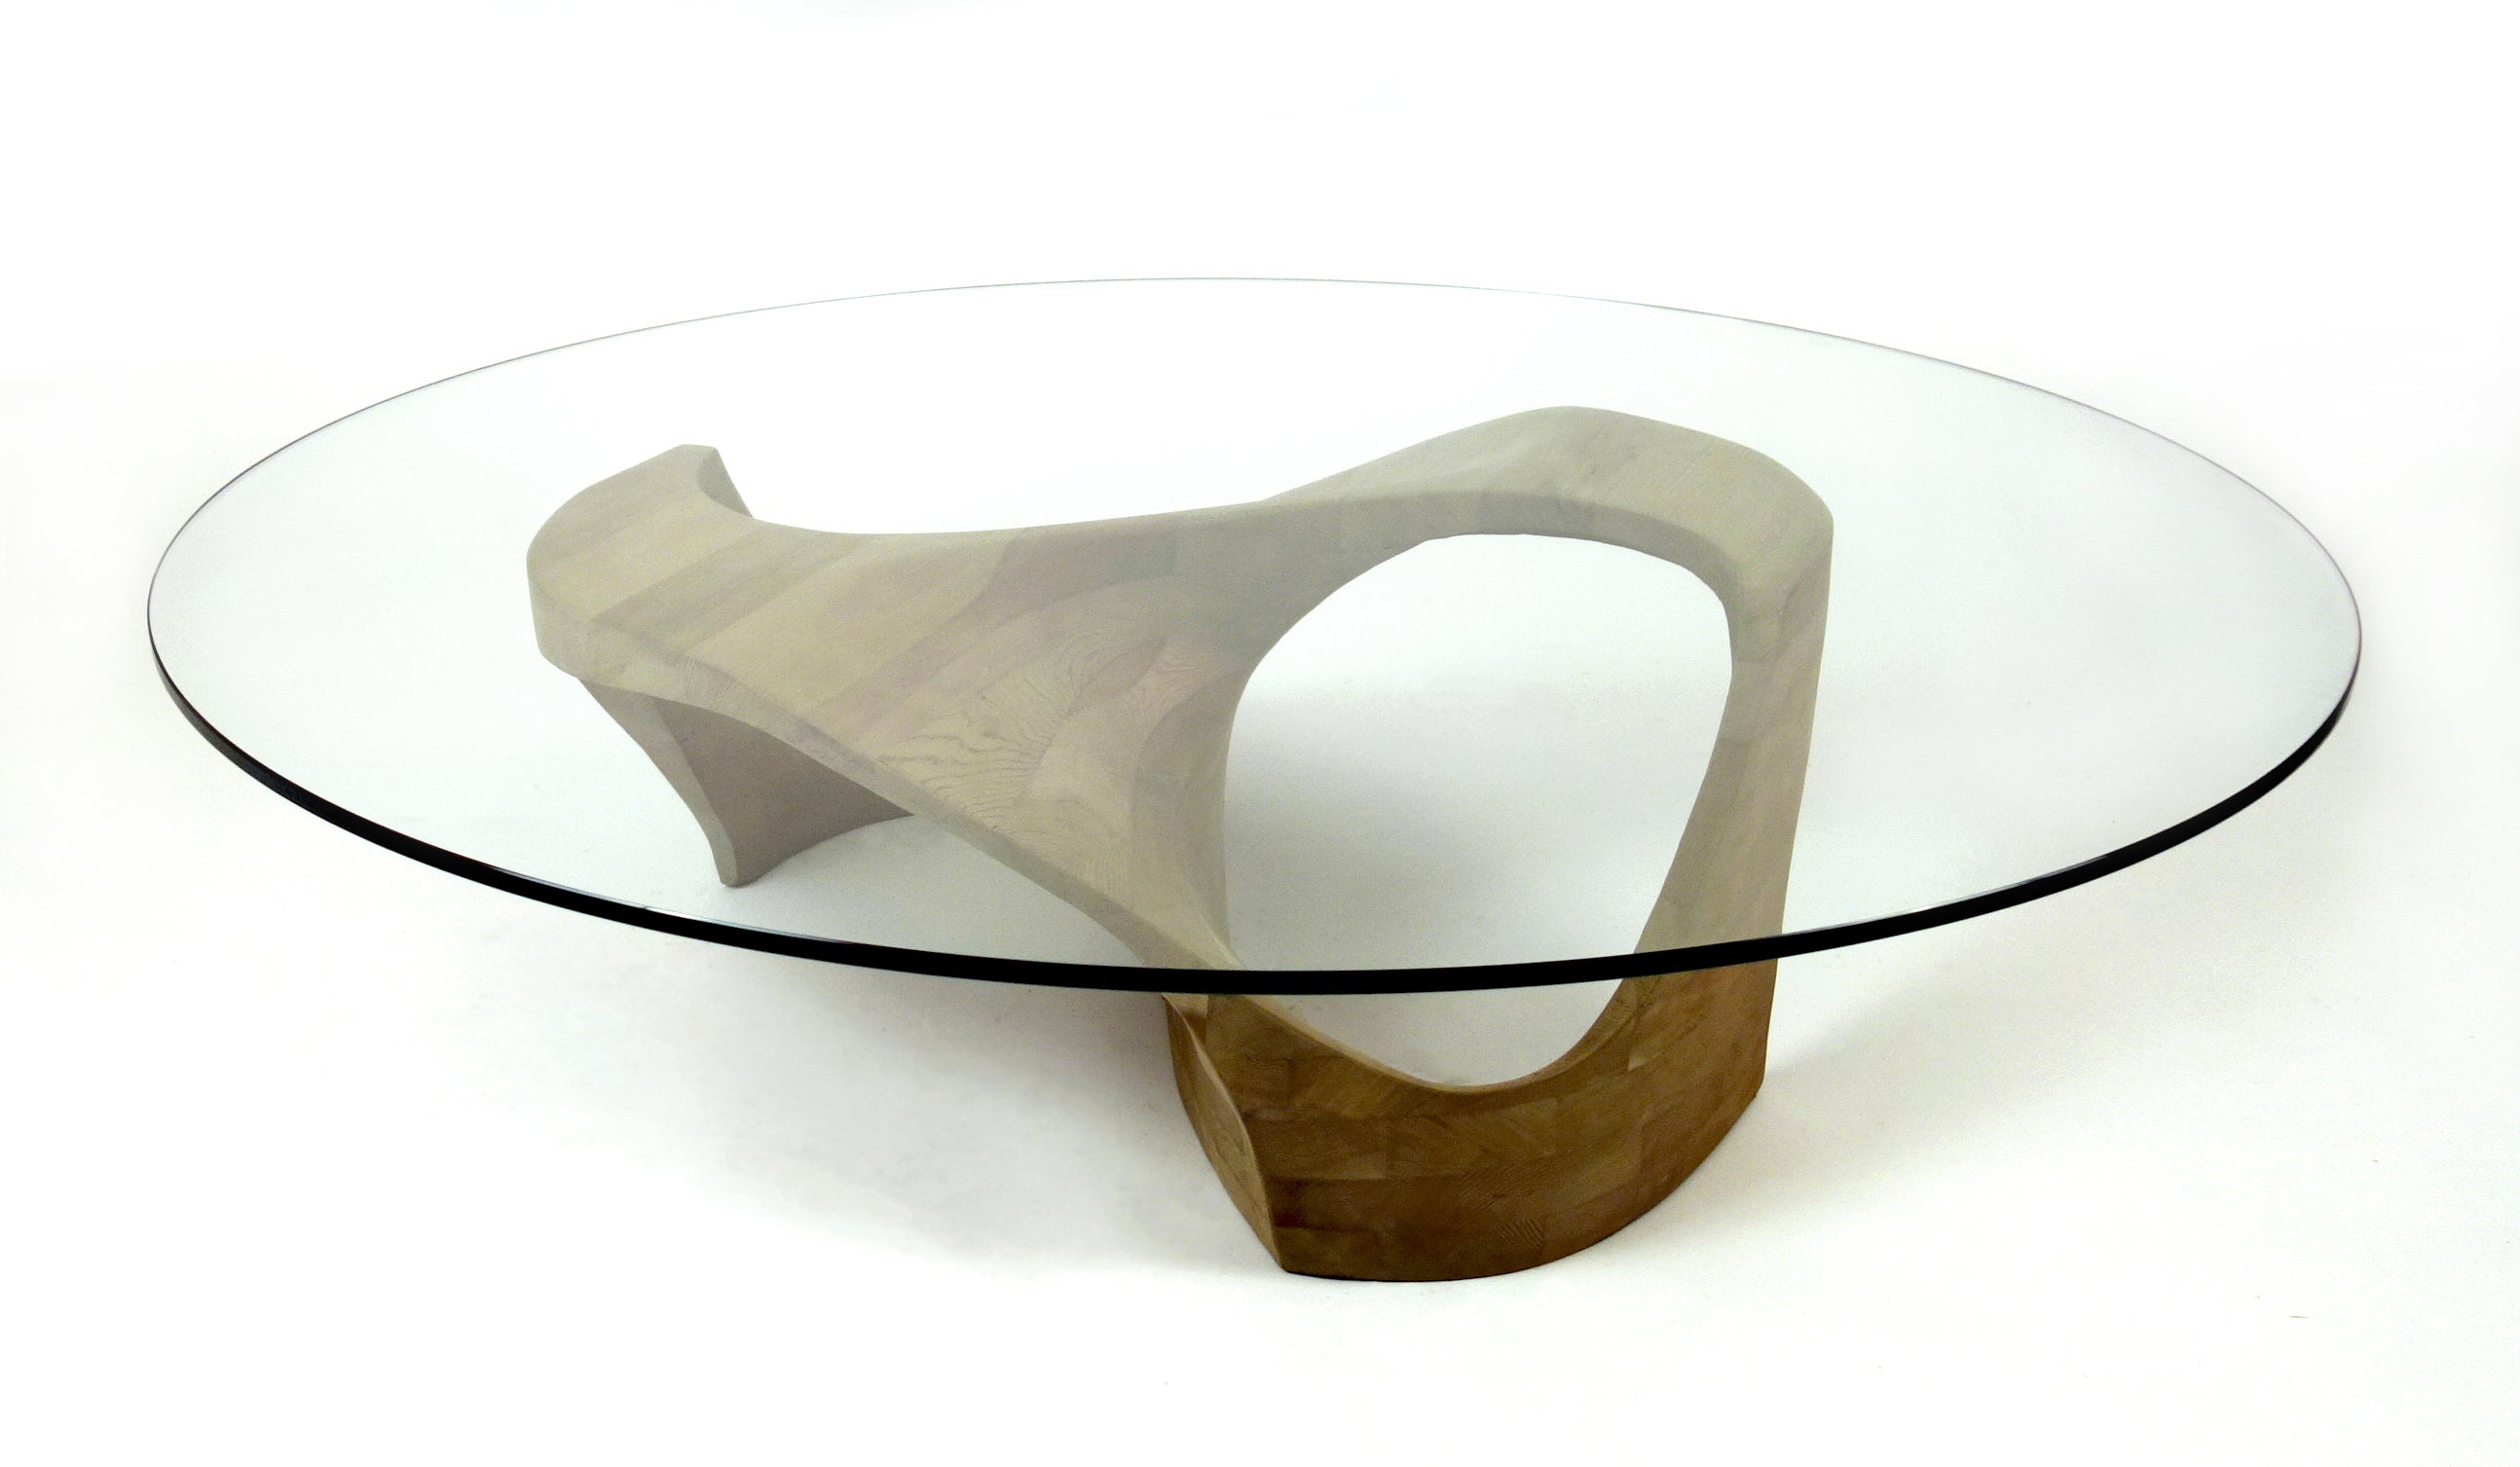 Loch coffee table by Aaron Scott
Dimensions: D 137.5 x W 137.5 x H 36 cm
Materials: atlantic cedar, glass.
Also available in other woods: bleached cherry, walnut.


Brooklyn-based designer Aaron Scott was raised in the mountains and forests of